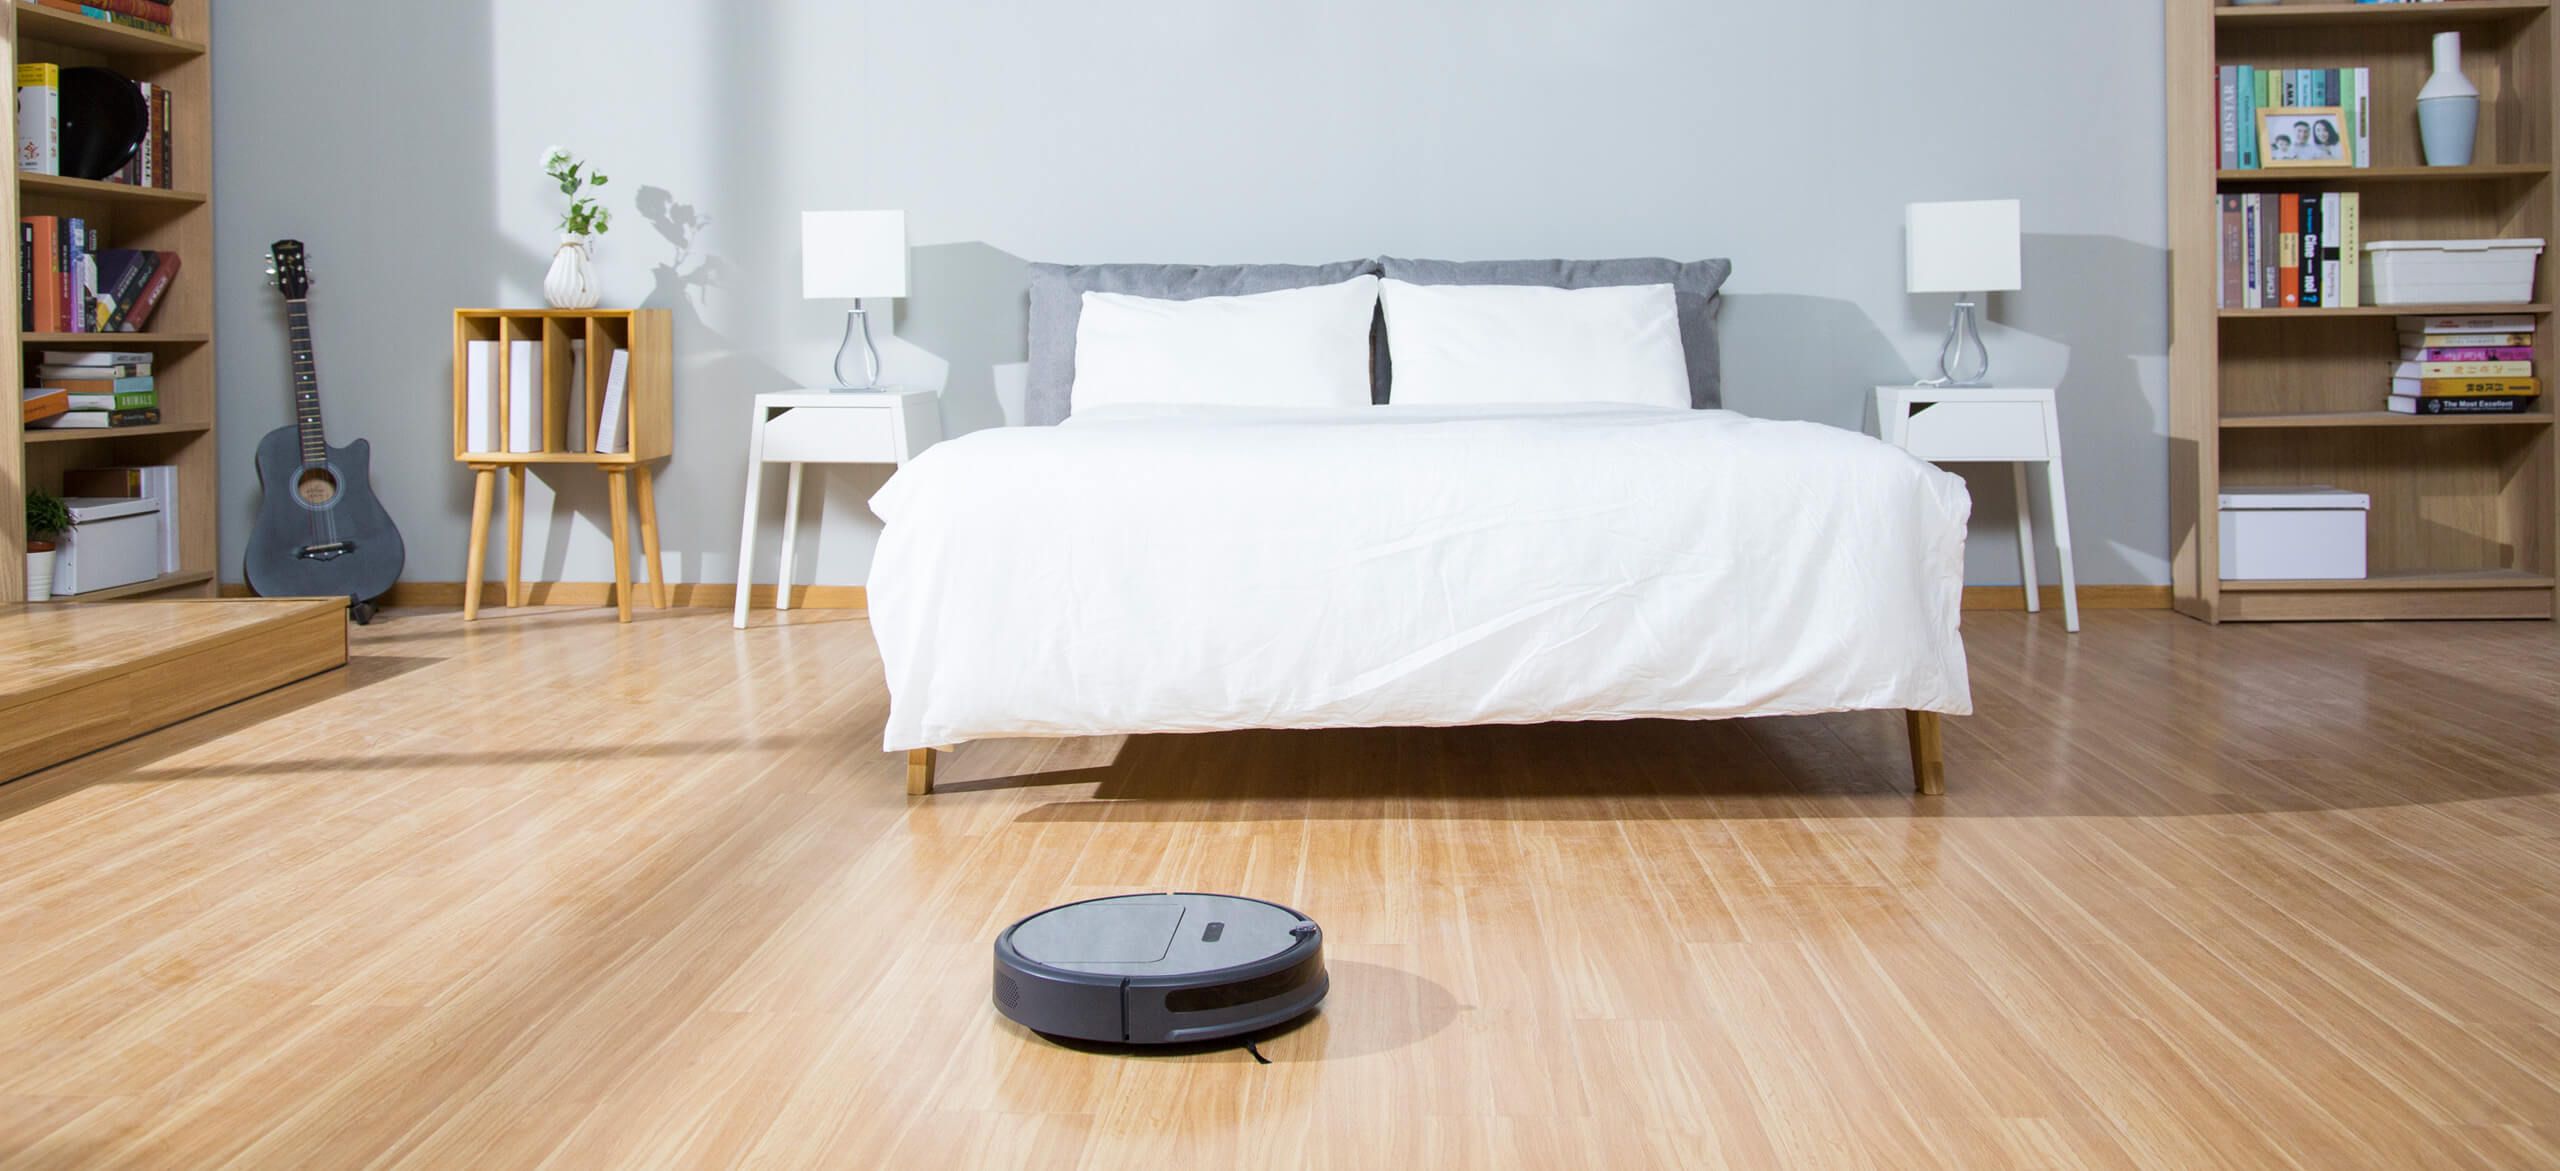 5 Tips For Choosing The Best Robotic Vacuum For Carpets image 2